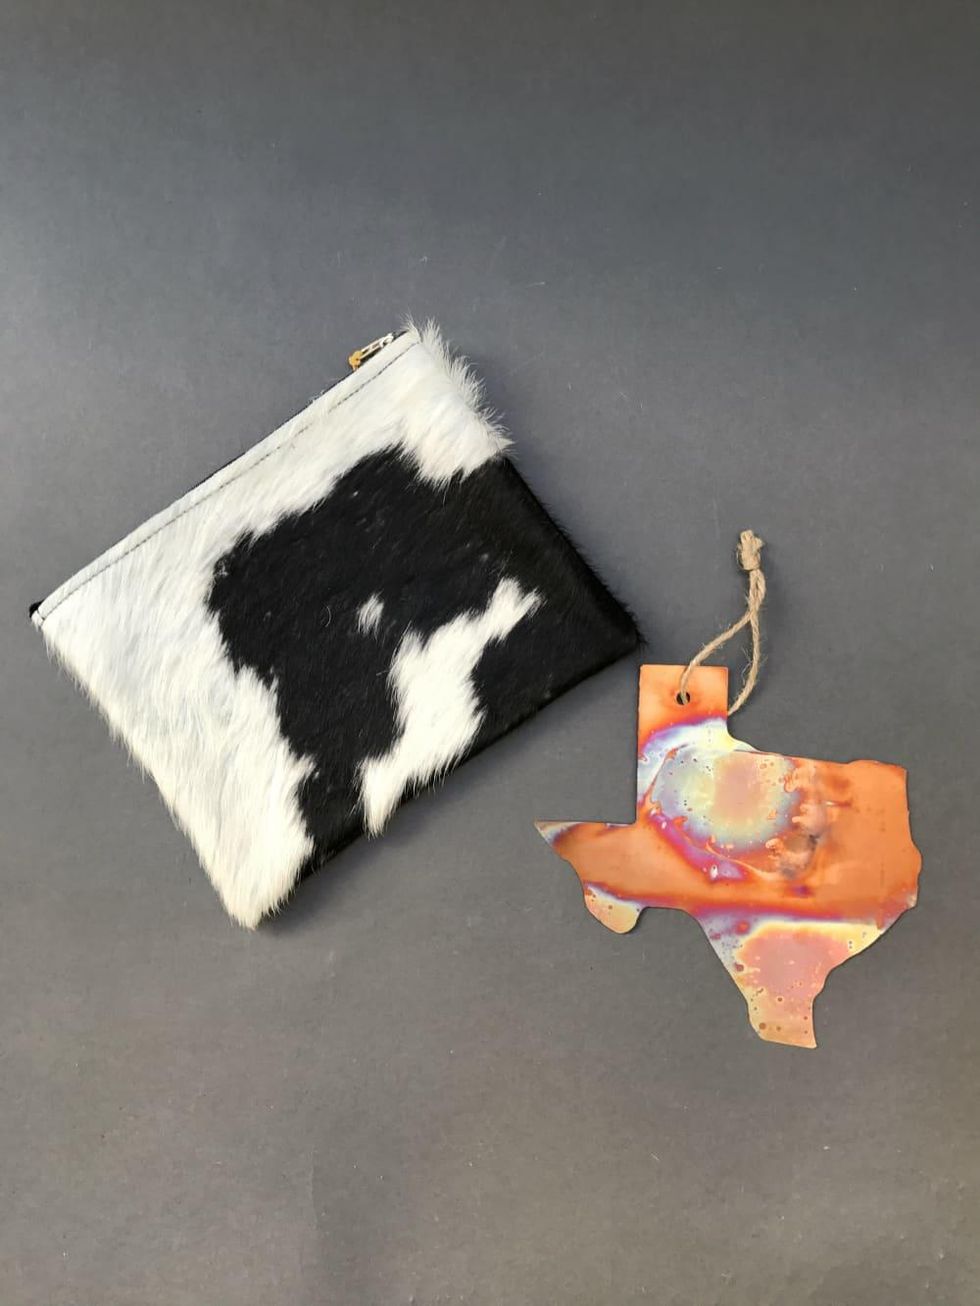 Dallas Antiques Company cowhide pouch and Texas ornament